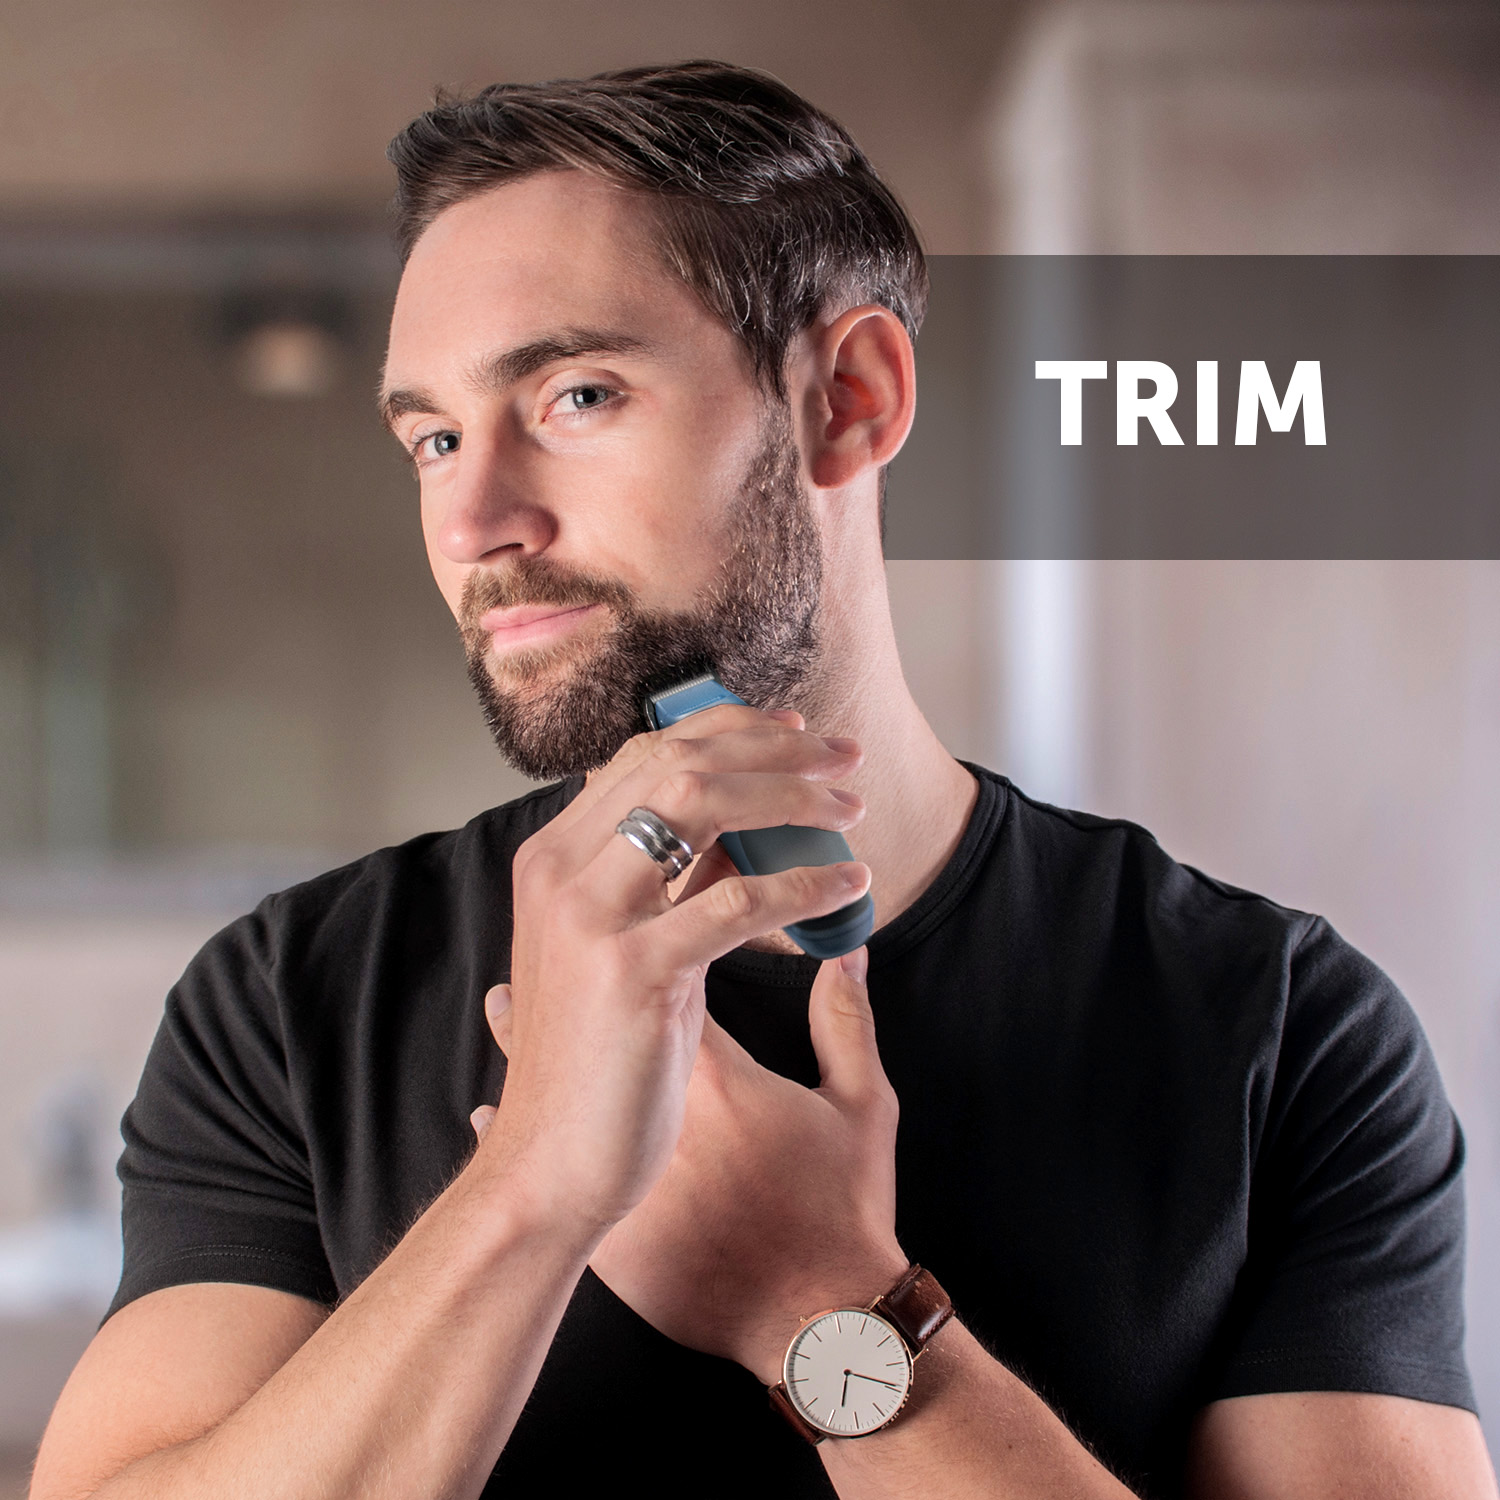 79305-2817 - Clipper & Trimmer Grooming Set - Trimmer lifestyle - TRIM